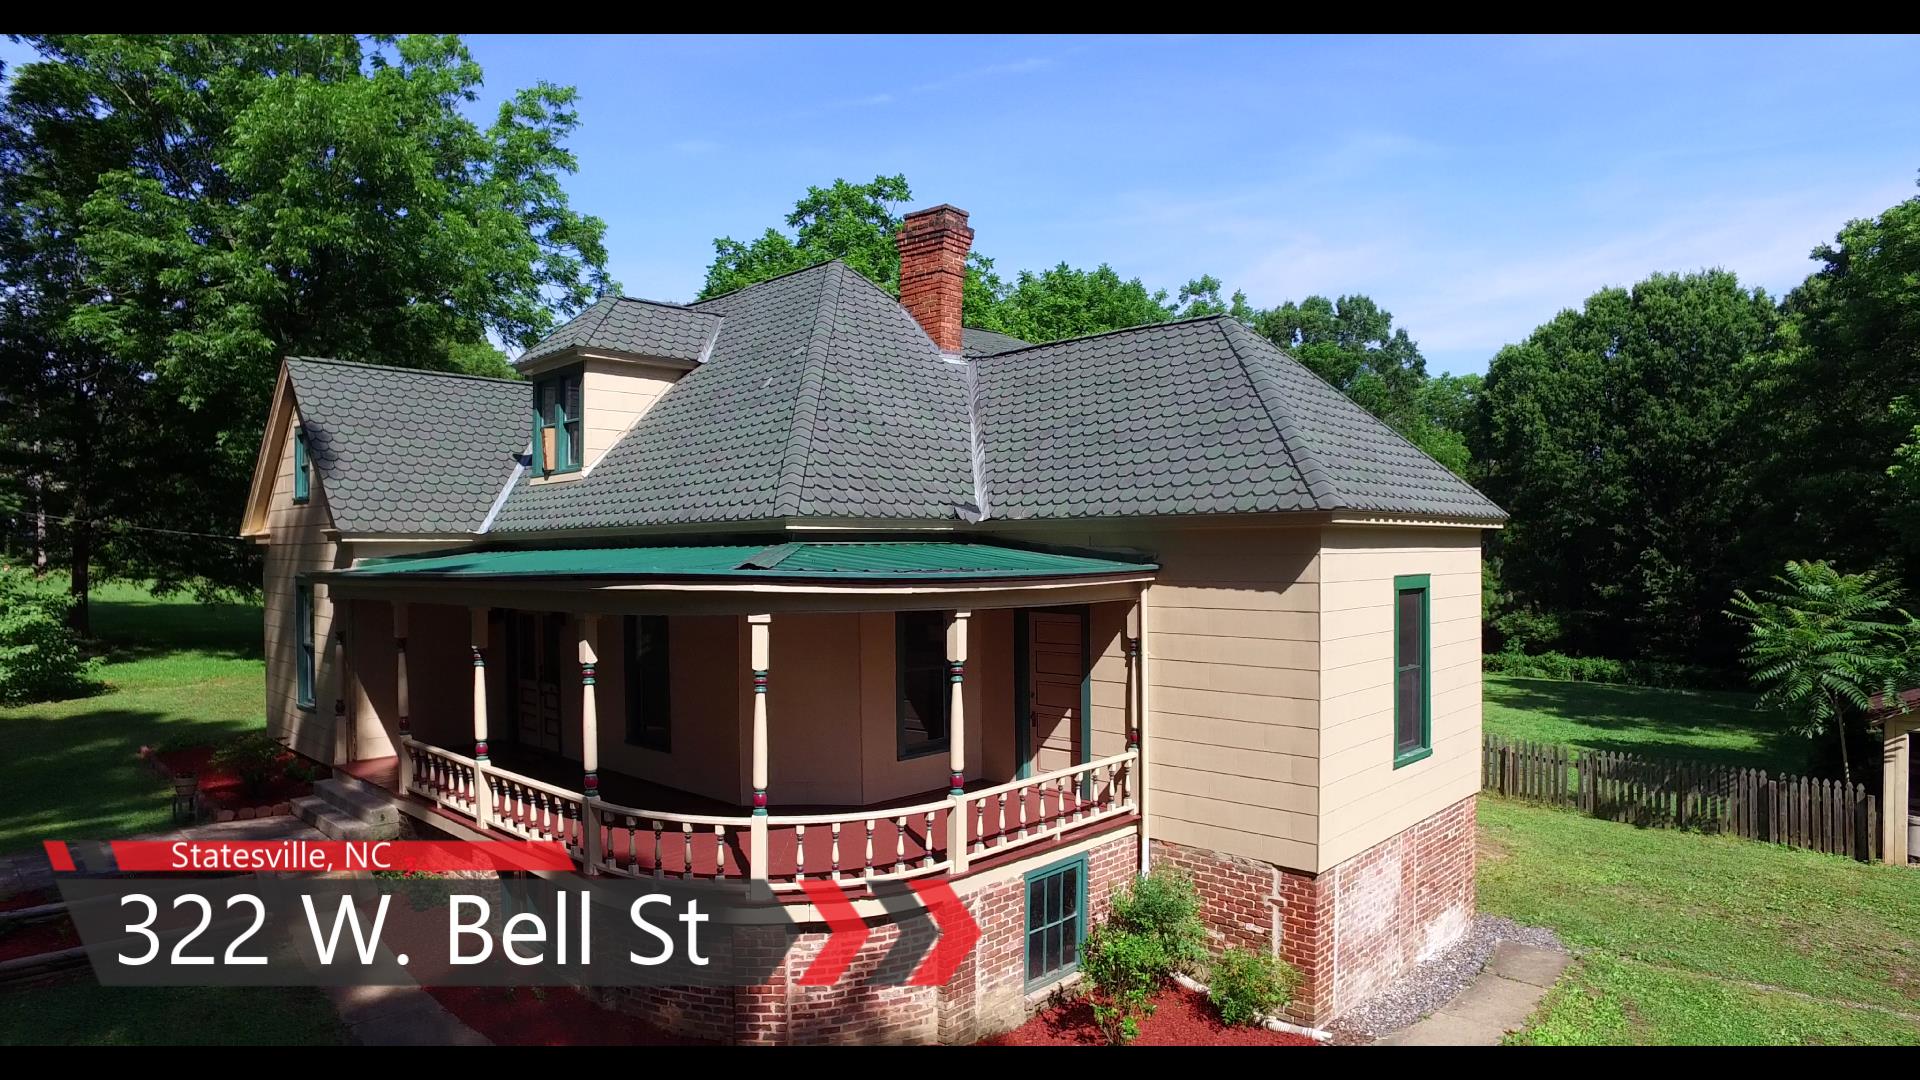 322 W. Bell St, Statesville, NC in the mid $250's VLOG # 138